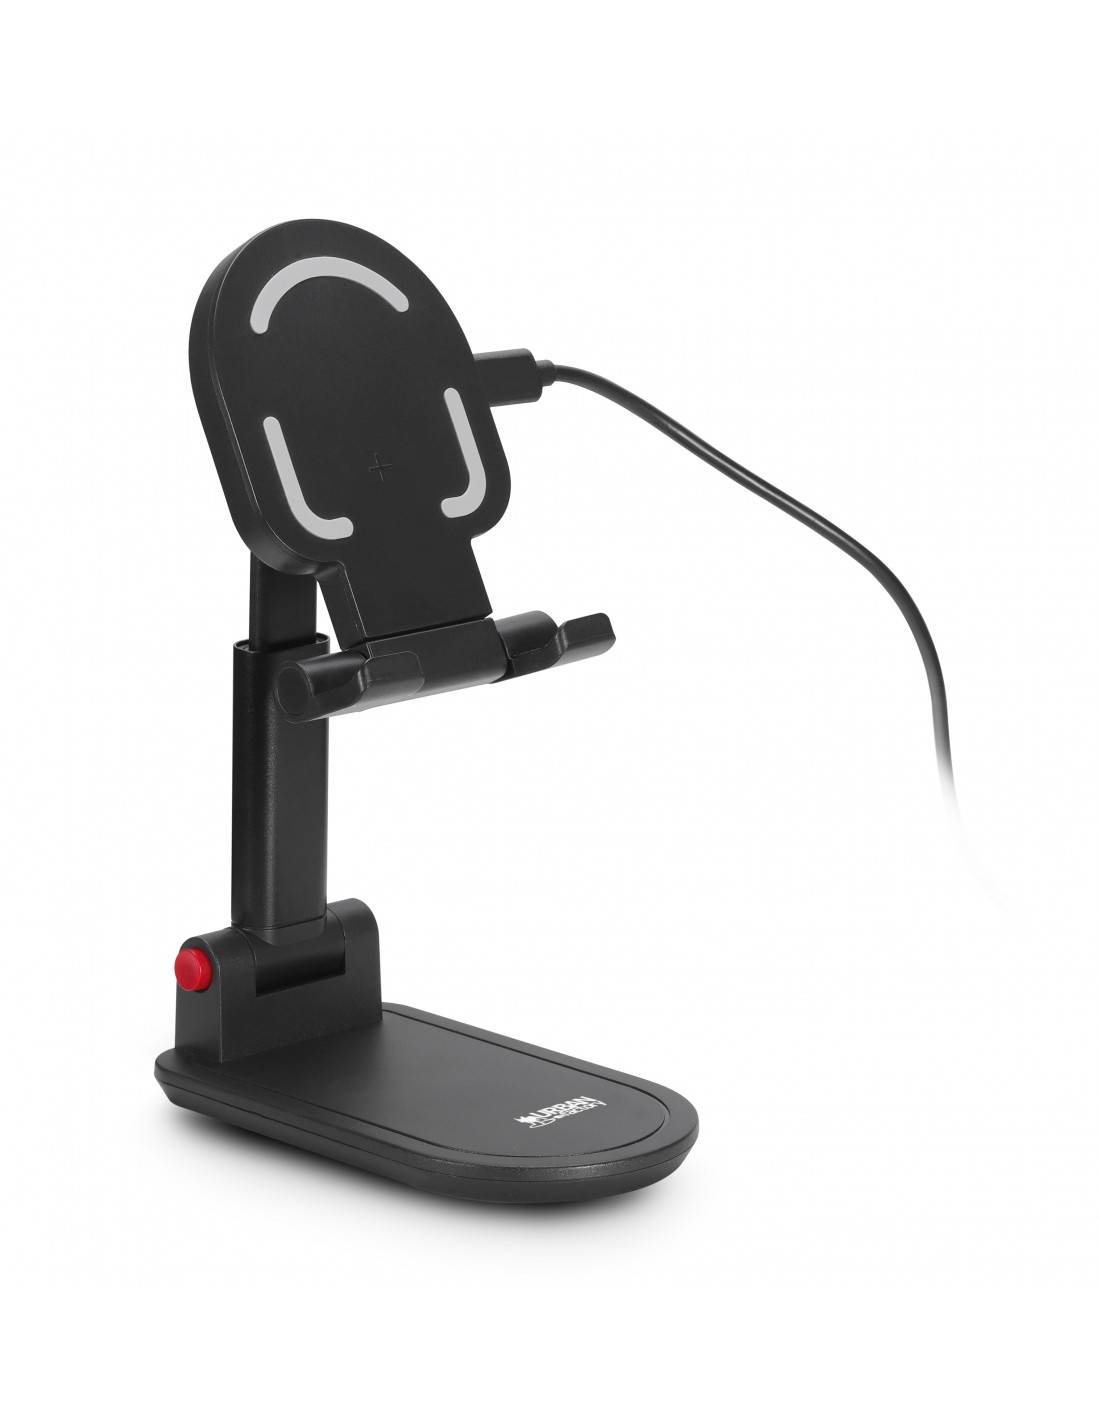 Rca Informatique - image du produit : INDUCTION CHARGER WITH ADJUSTABLE STAND FUNCTION 15WATT